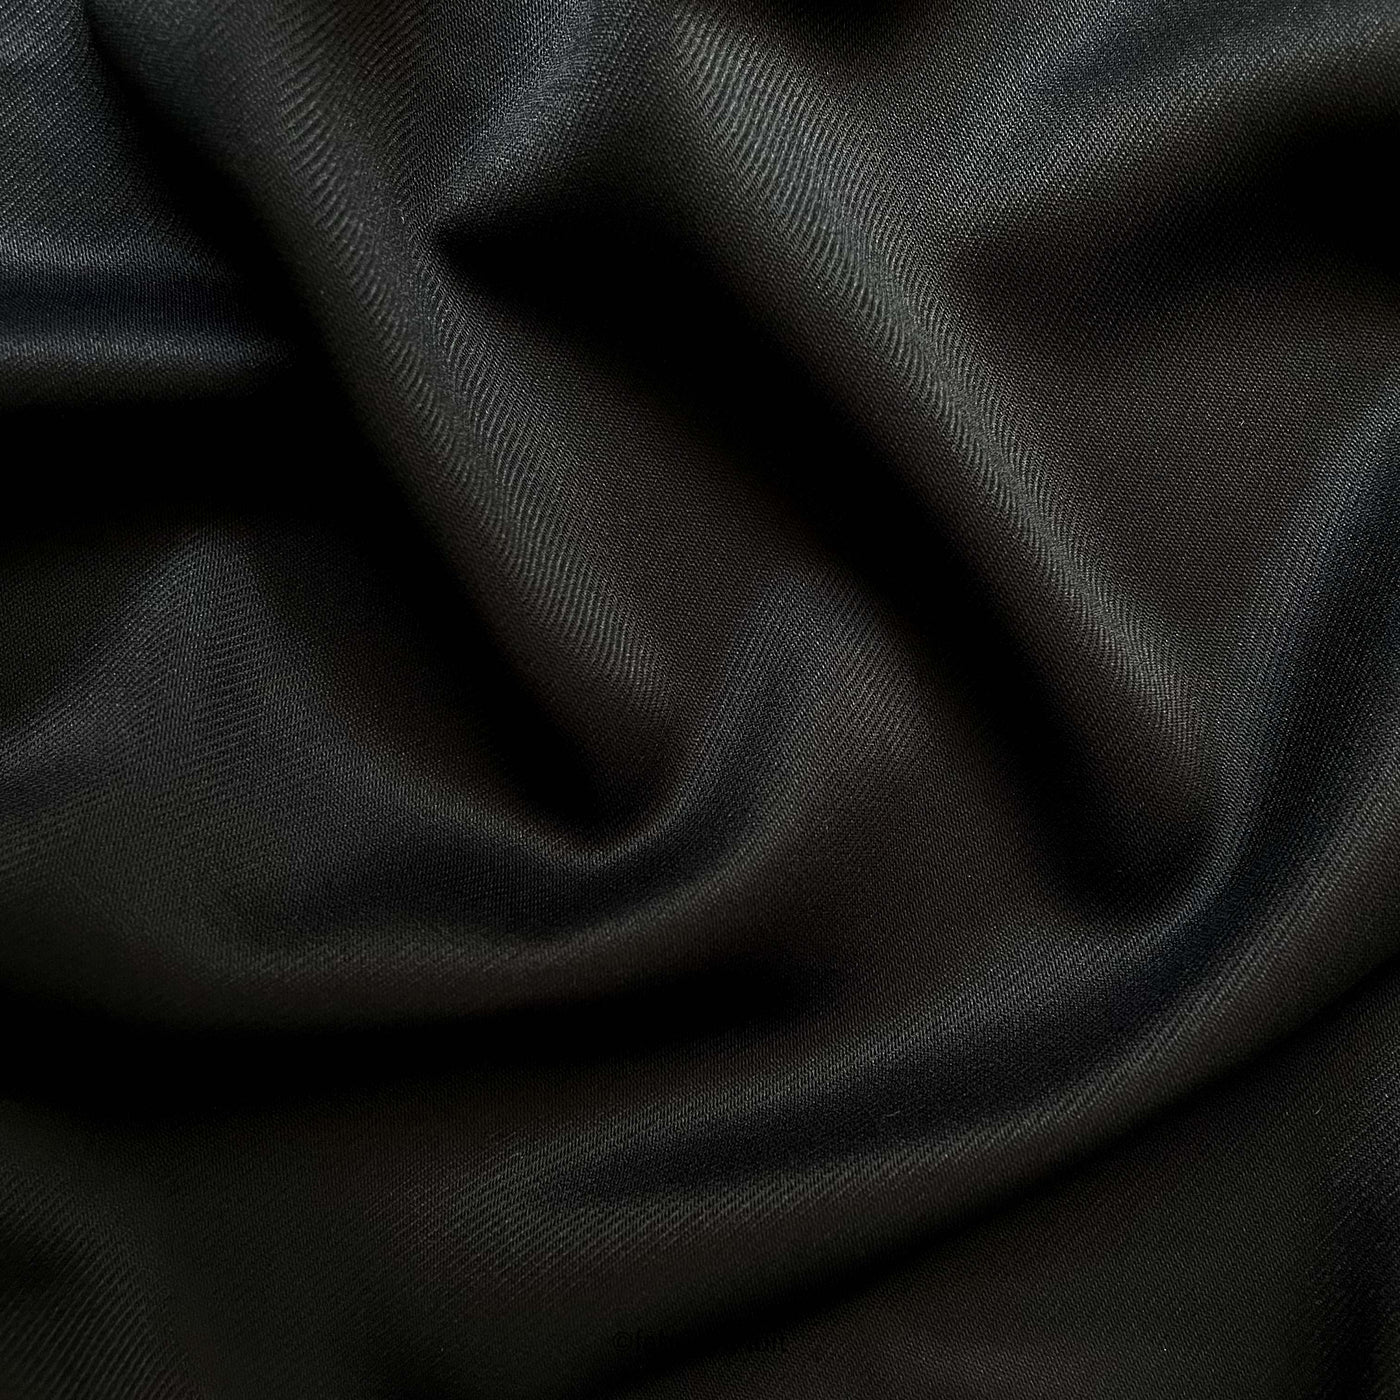 Fabric Pandit Fabric Charcoal Black Satin Luxury Suiting Fabric (Width 58 Inches)